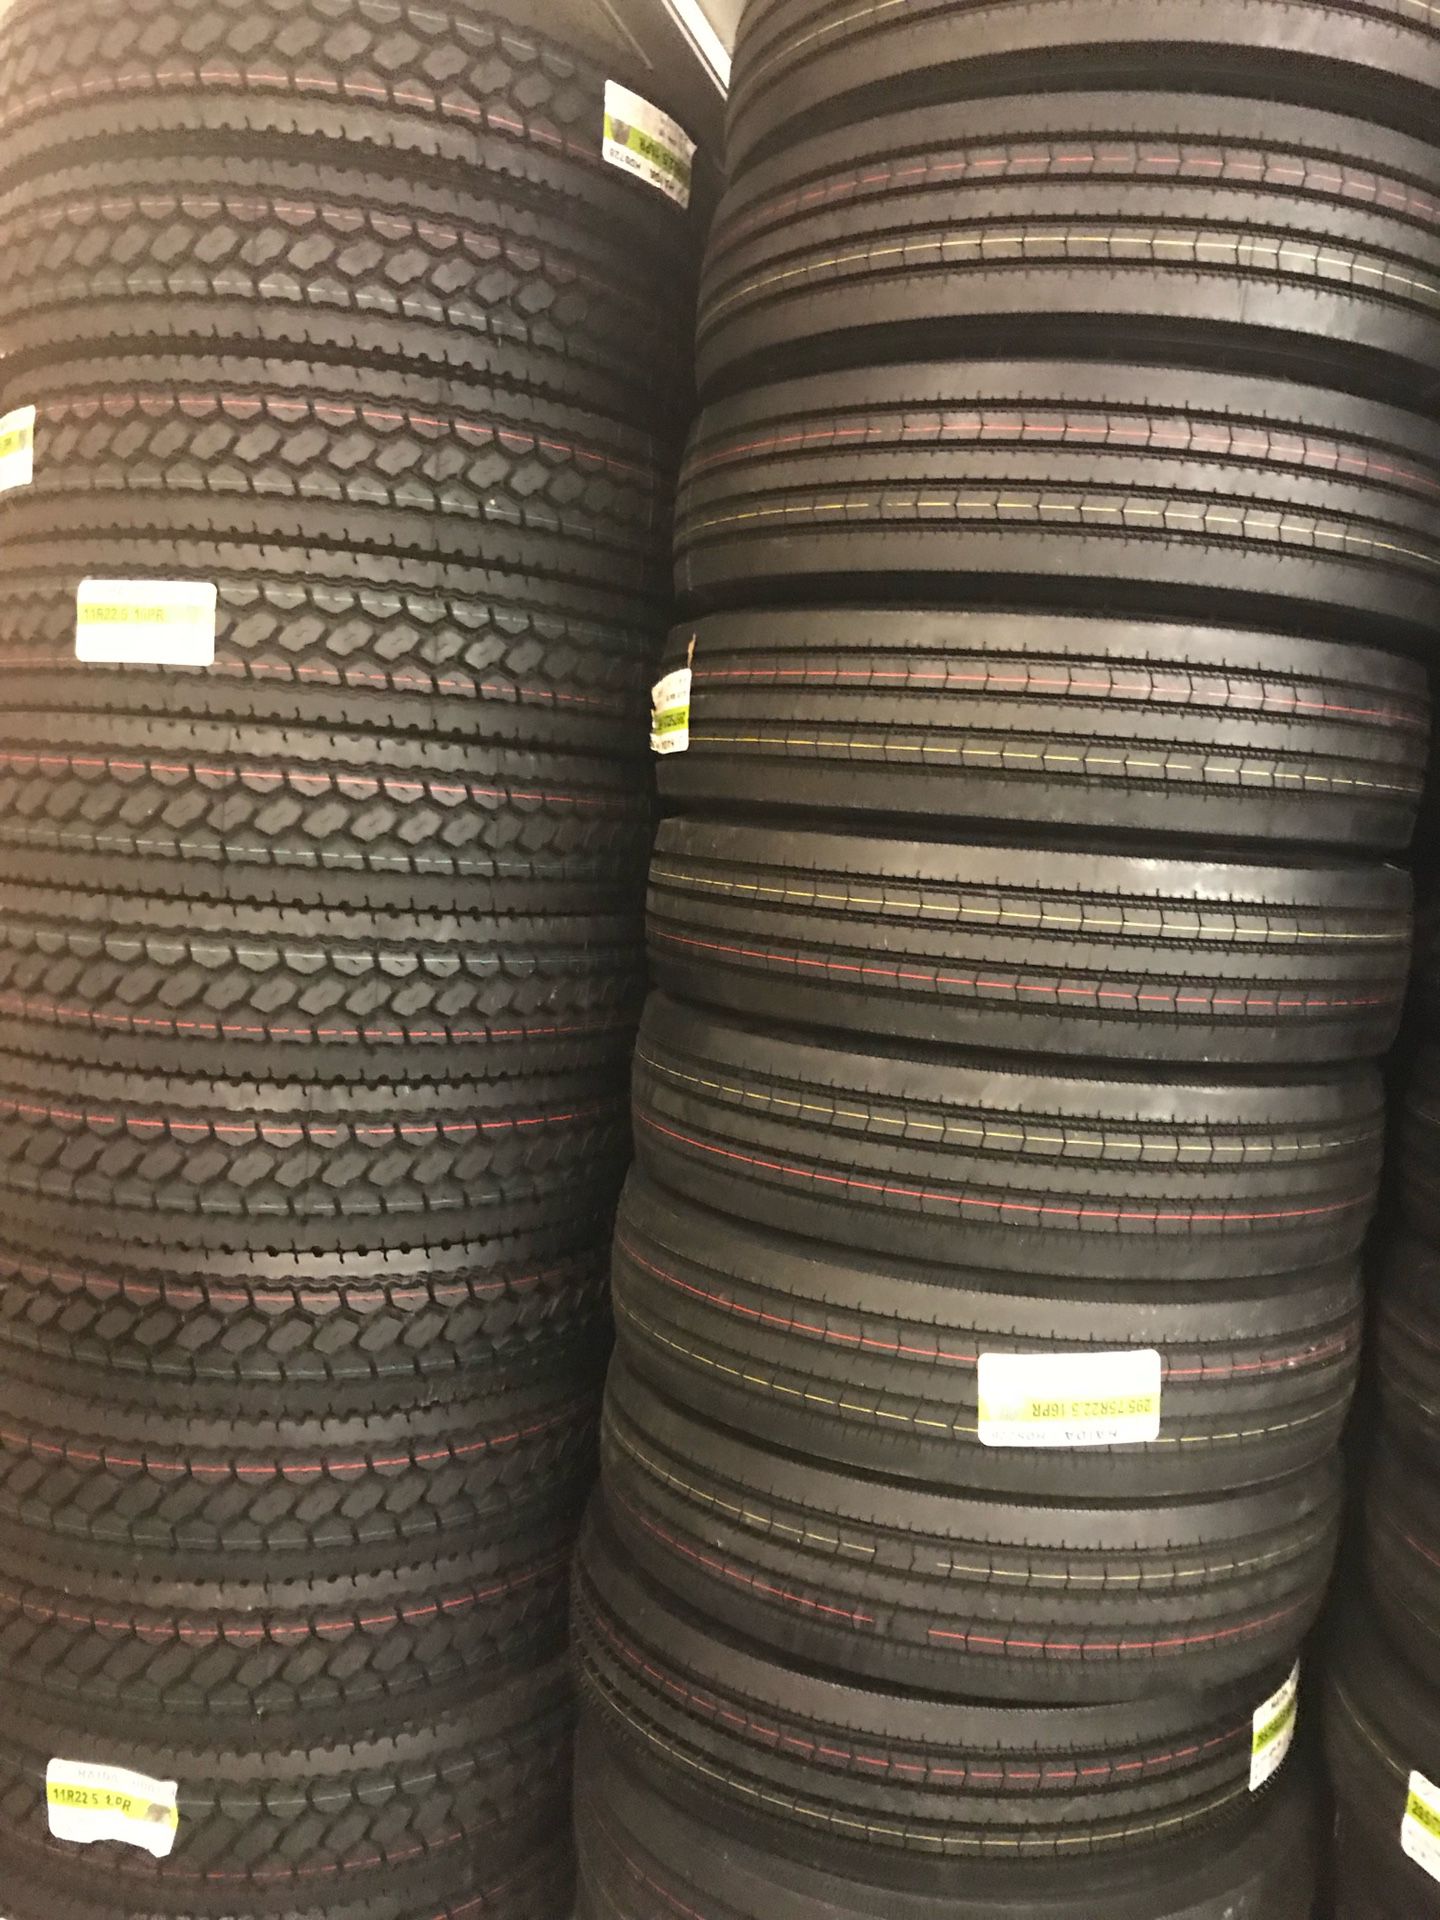 Semi Truck tires and trailer